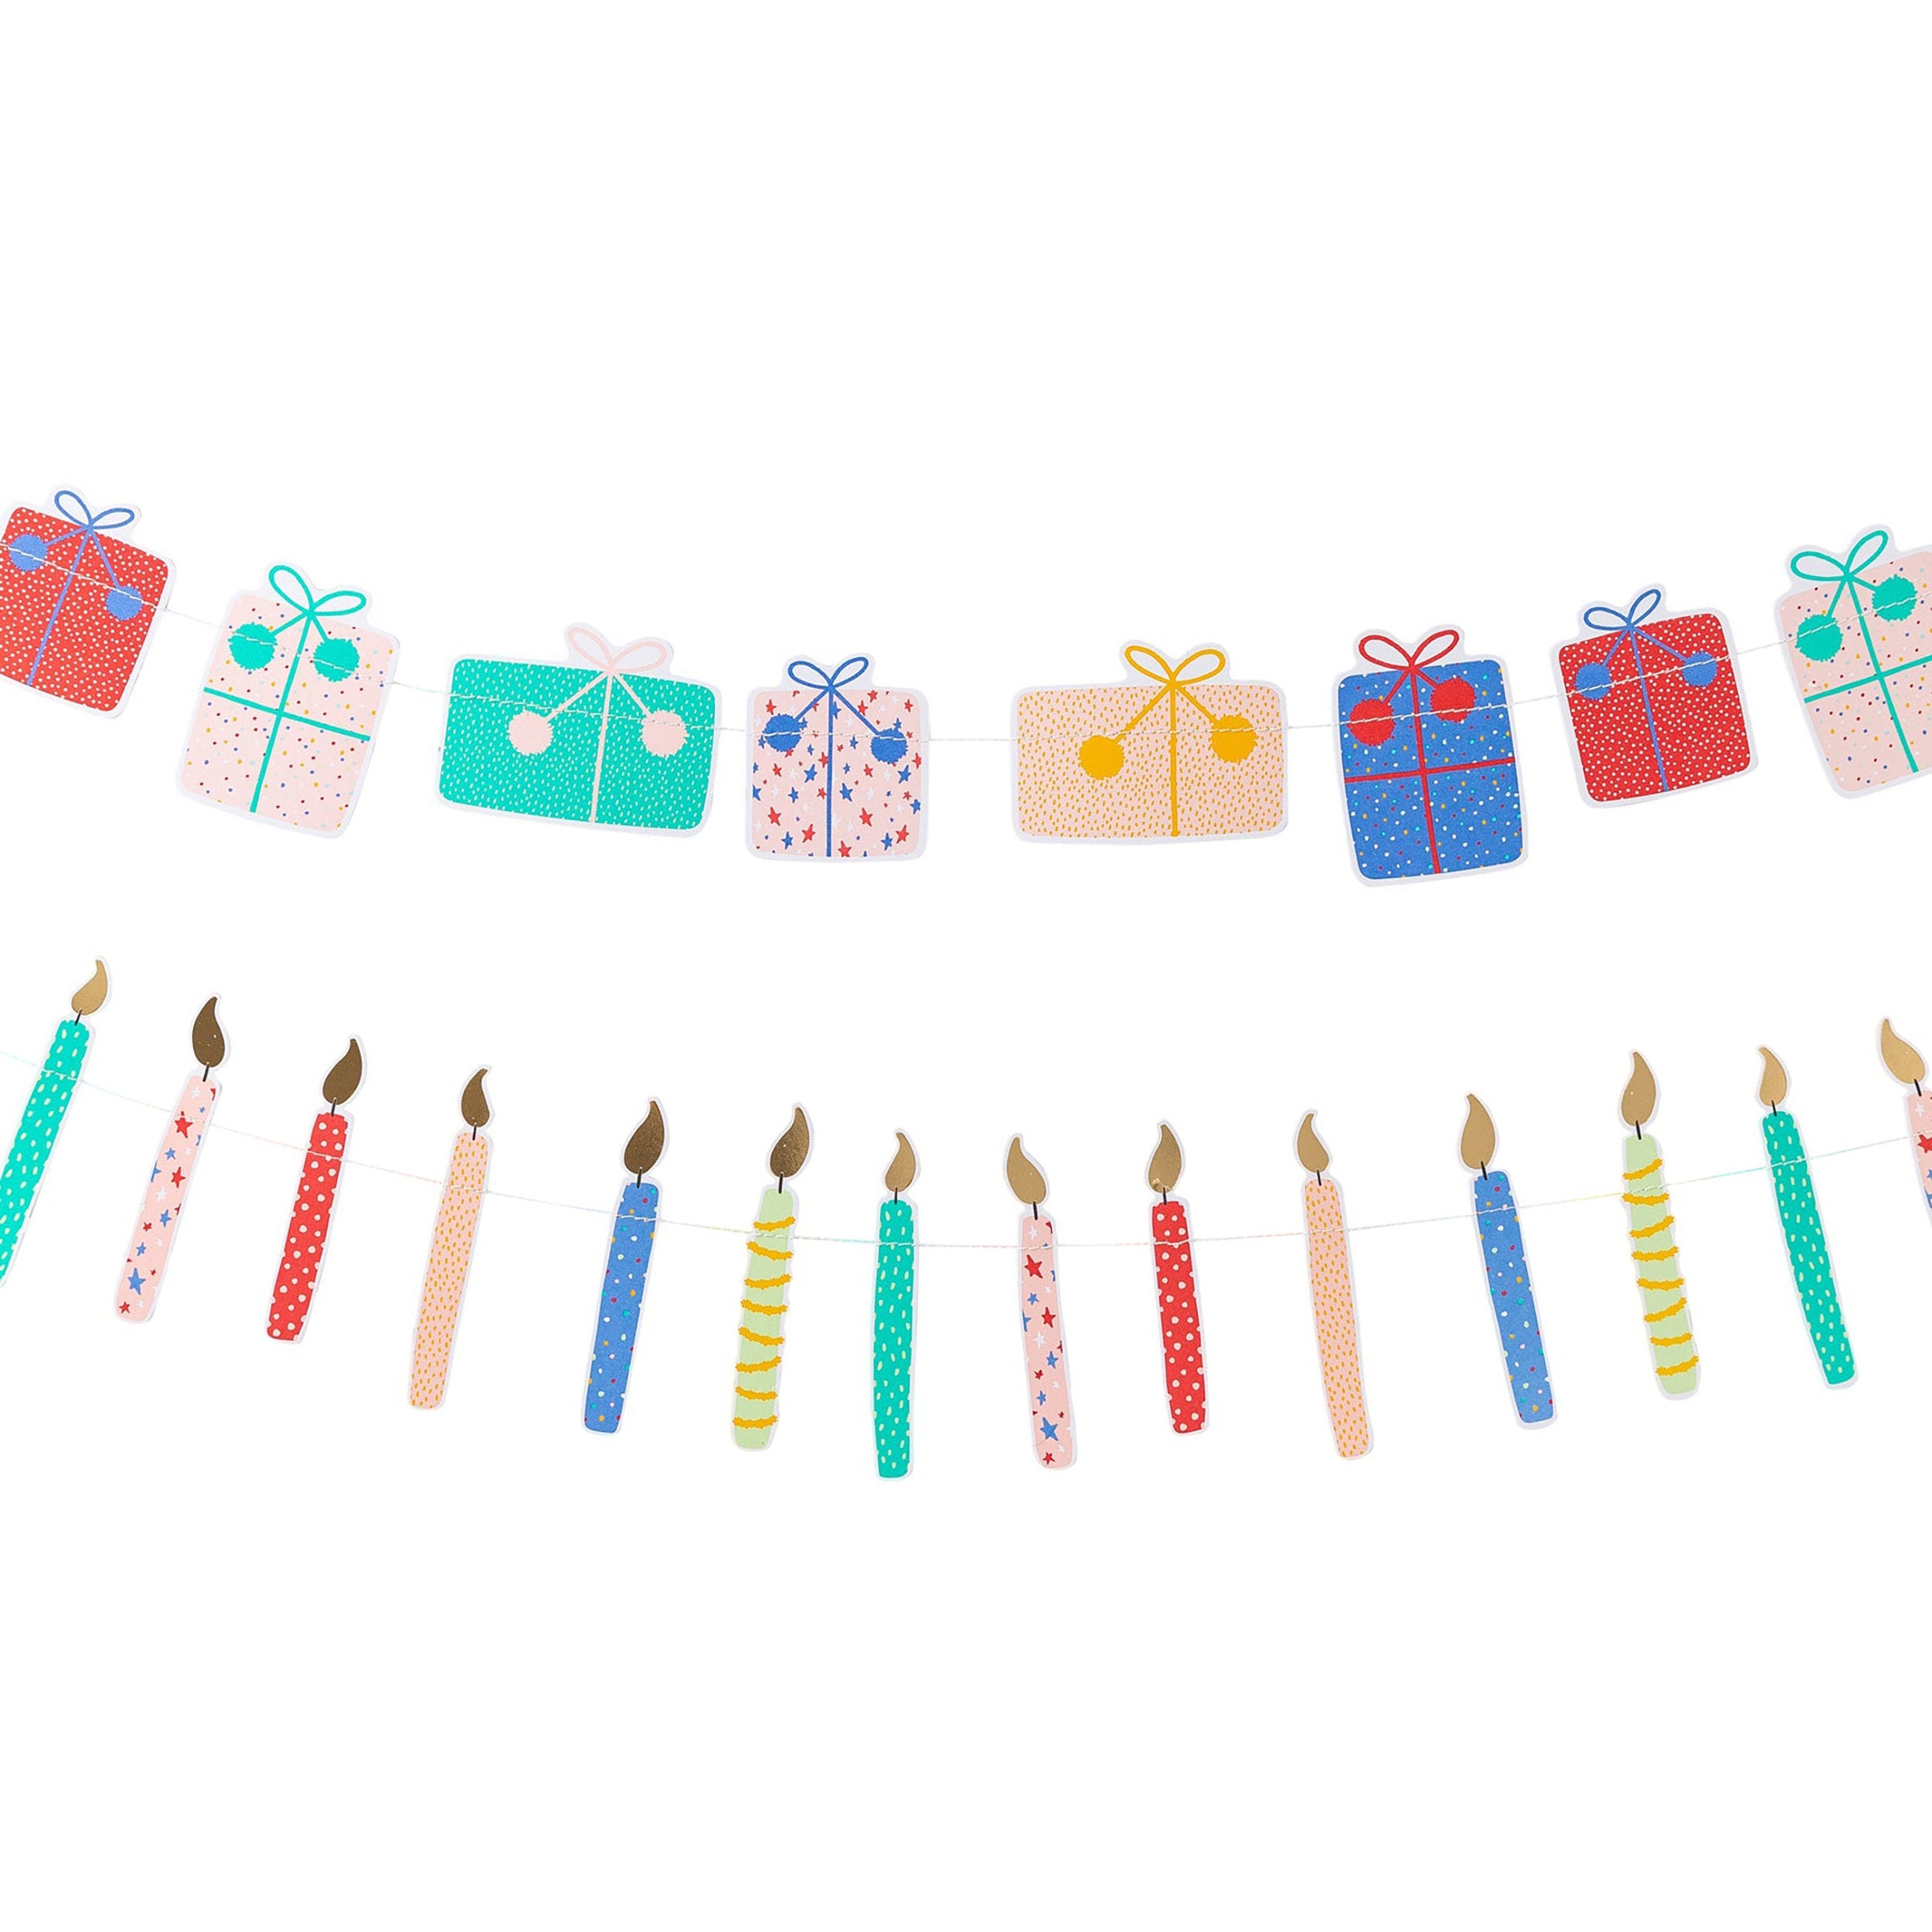 Birthday Party Banners | Hanging Party Decorations - Birthday Decorations - Birthday Candle Decoration - Paper Garland - Birthday Banner